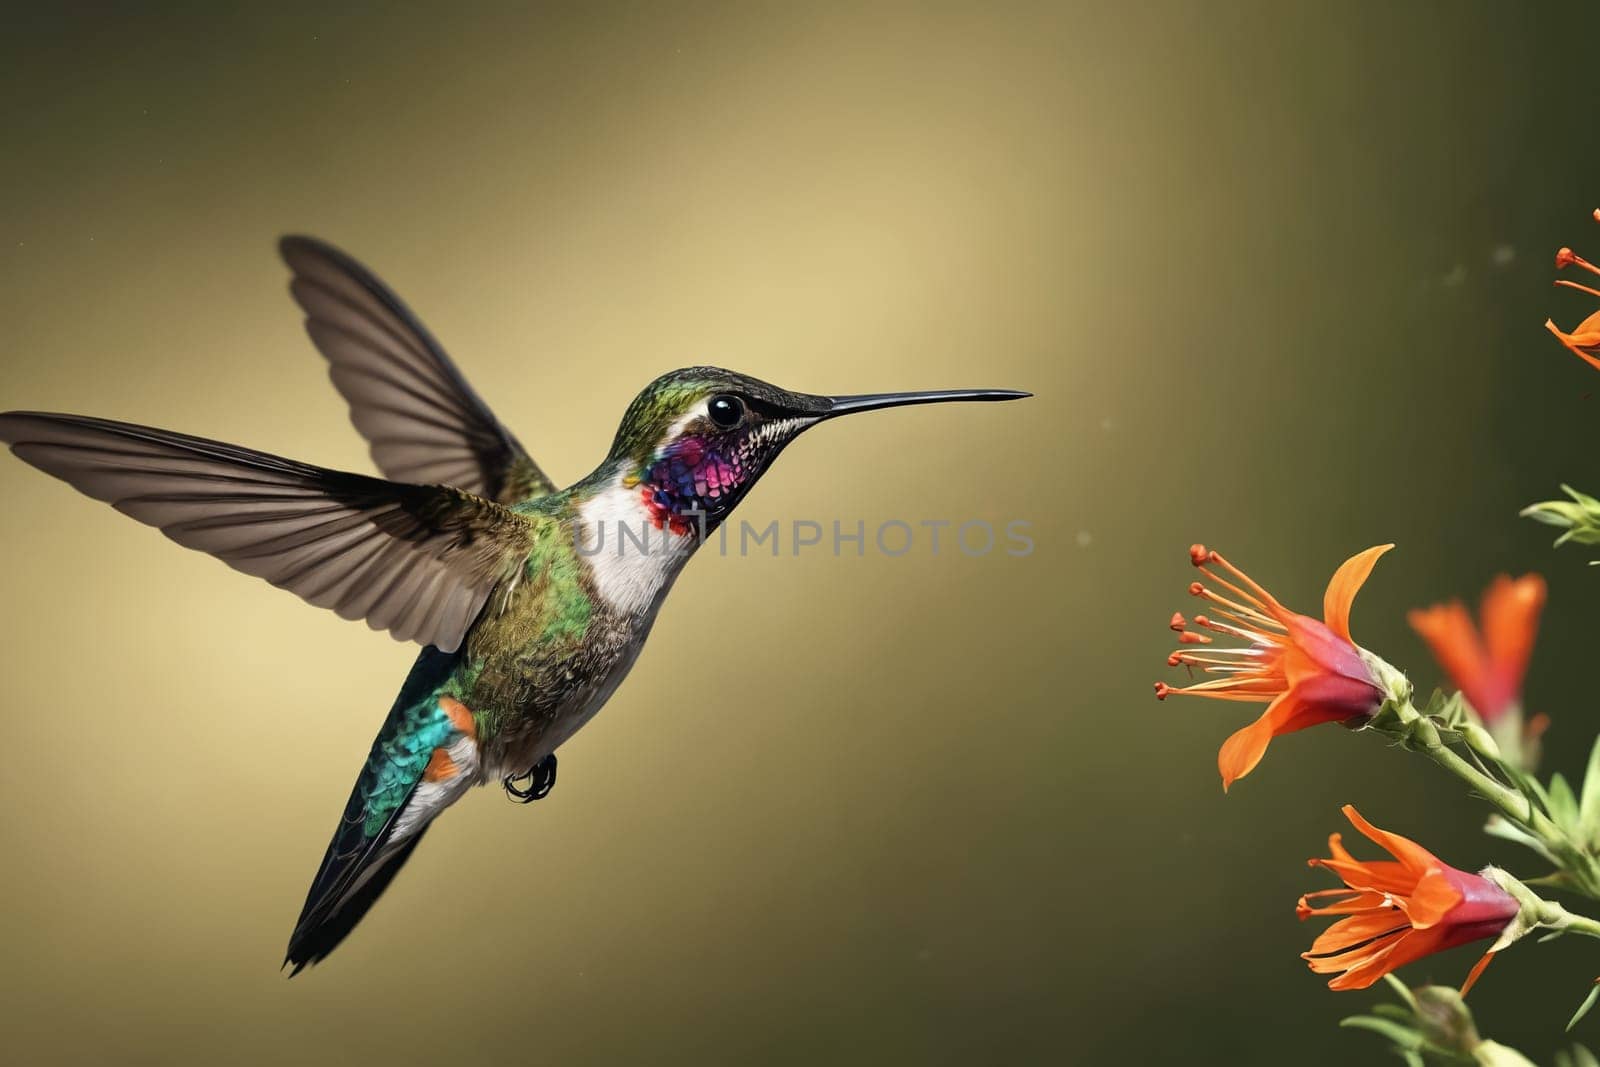 This image beautifully captures a Ruby-throated Hummingbird - a marvel of nature known for its iridescent green feathers and bright ruby-red throat. Perfect for use in environmental education or bird-watching content.